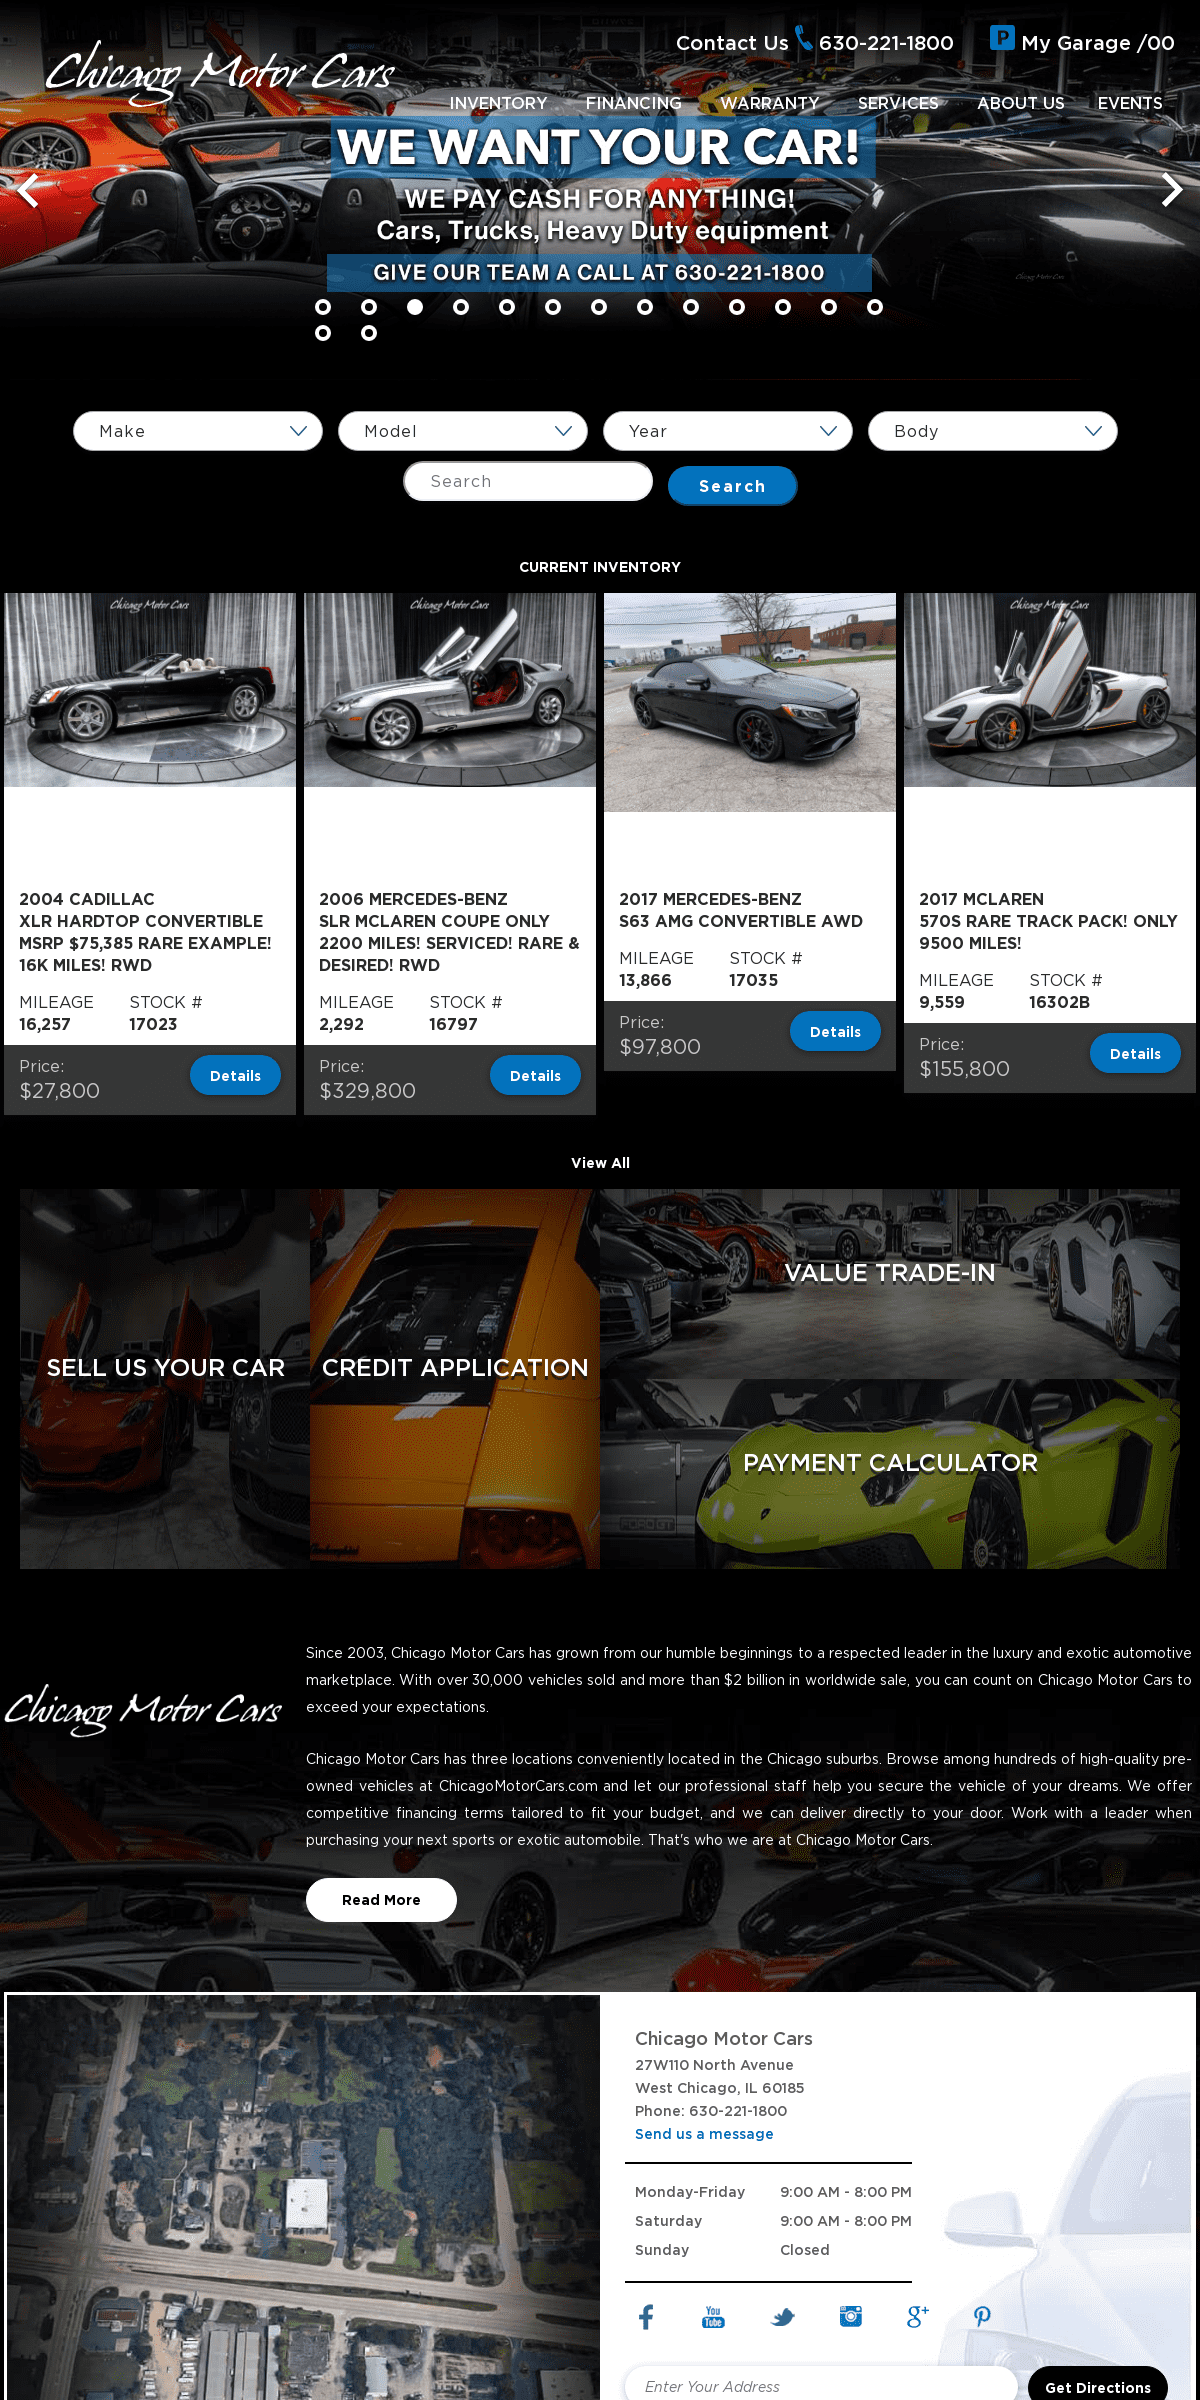 A complete backup of chicagomotorcars.com